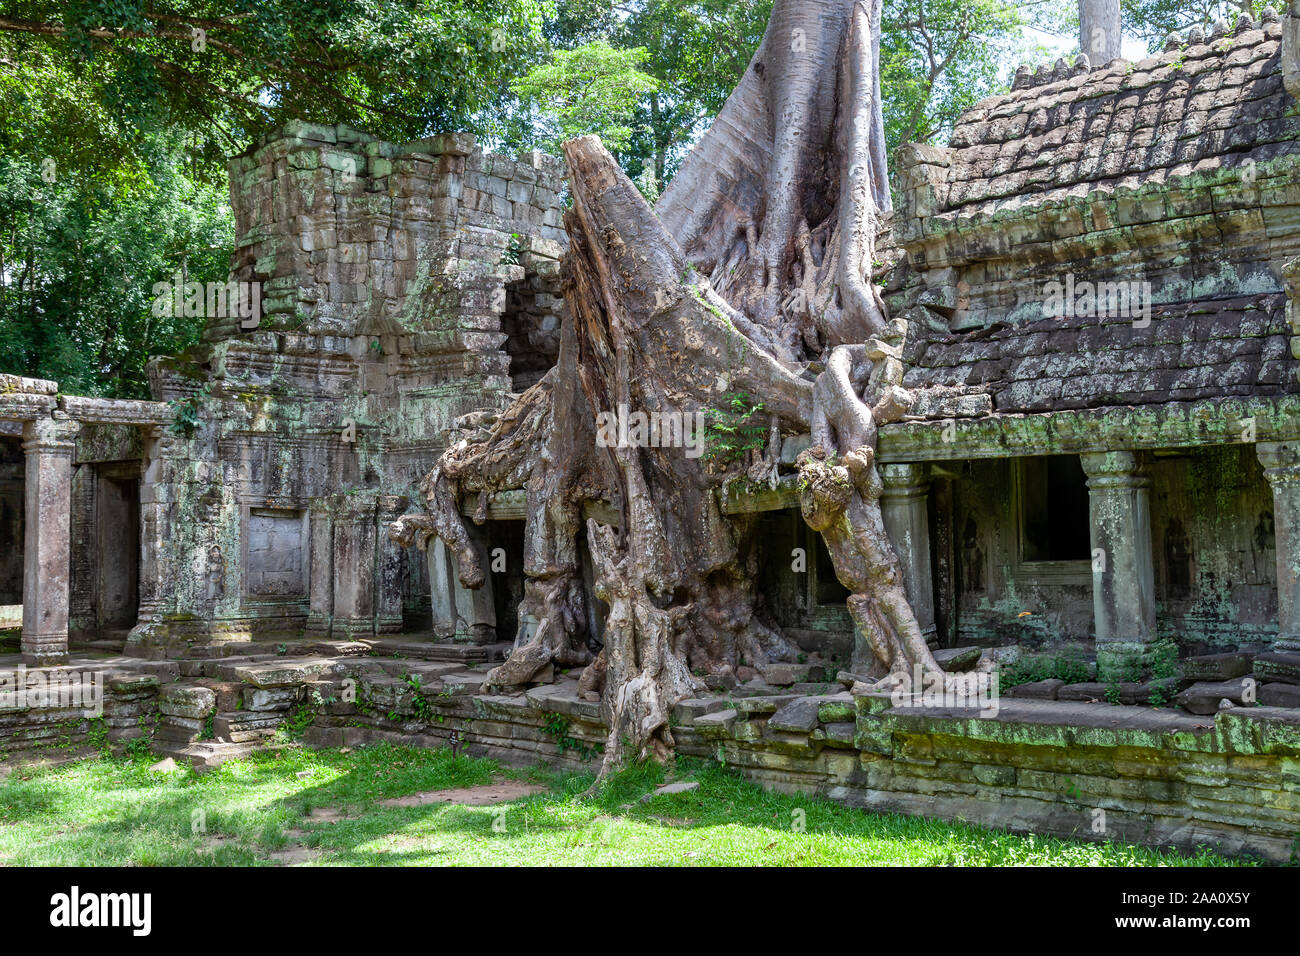 Spung tree at an temple near Siem Reap, Cambodia. Most temples are covered with some kind of moss and massive and impressive spung trees. Stock Photo